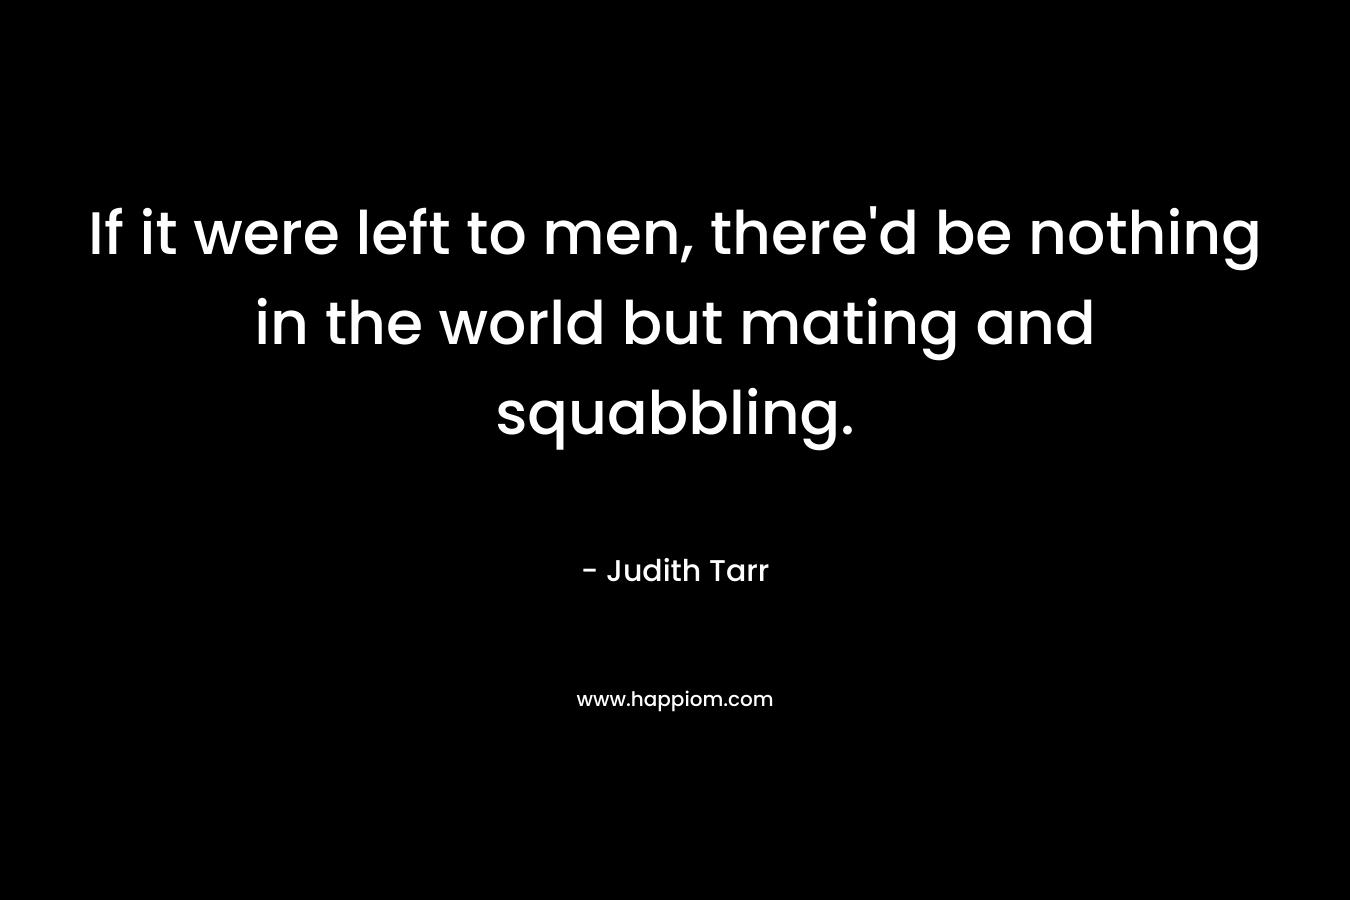 If it were left to men, there’d be nothing in the world but mating and squabbling. – Judith Tarr